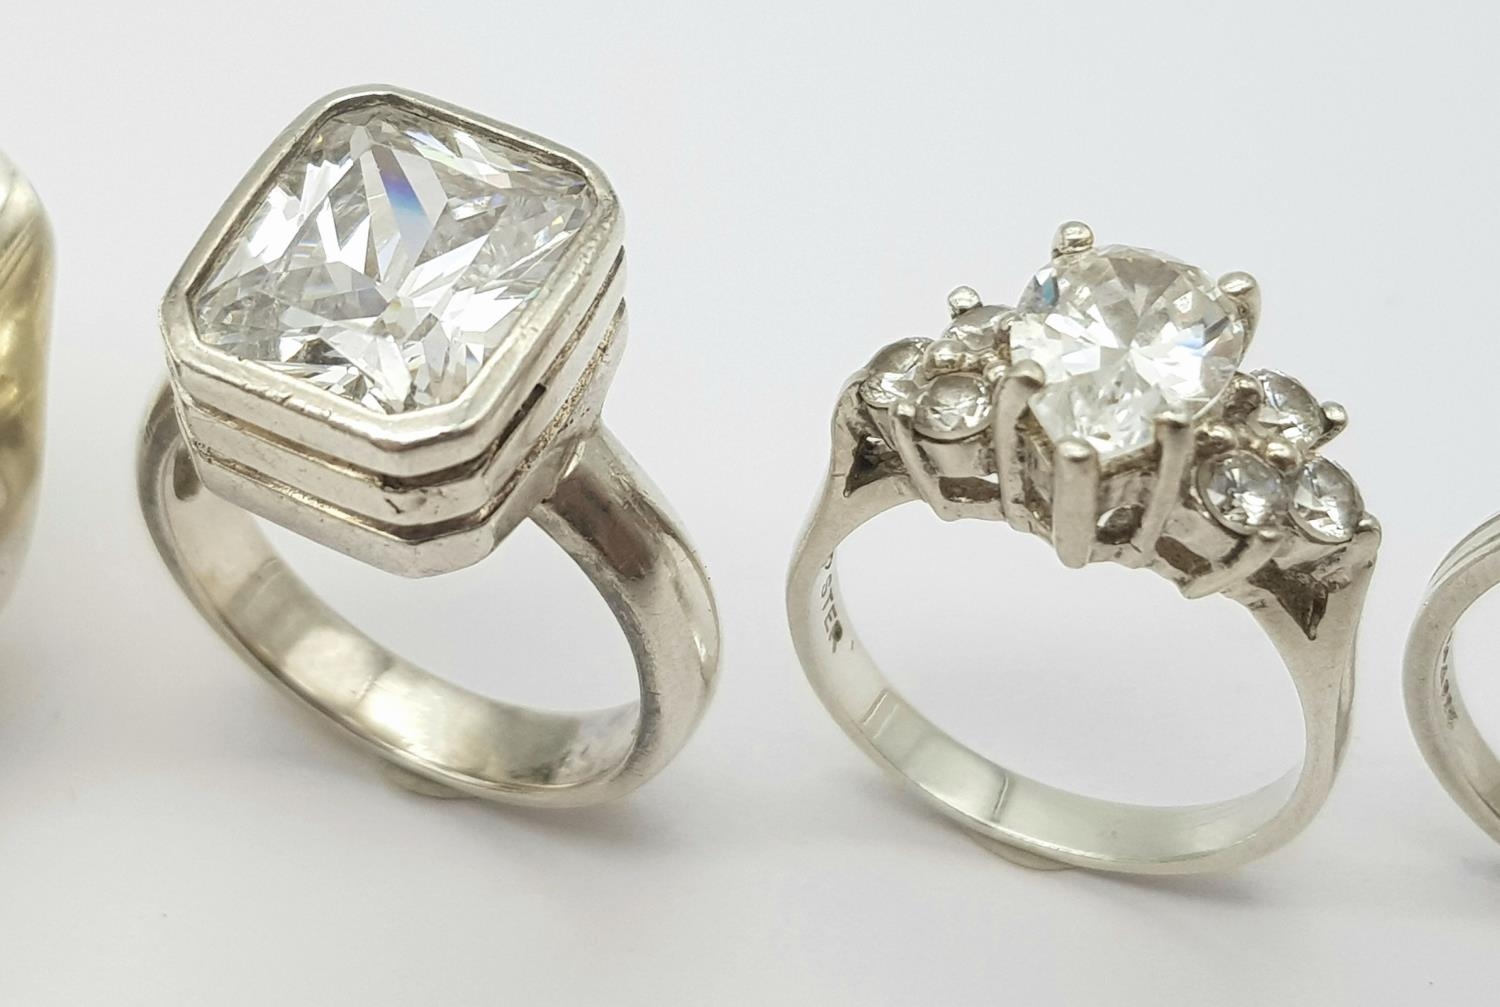 A Selection of 4 sterling silver rings, some set with cubic zirconia, sizes N-R, total weight 28.3g. - Image 5 of 6